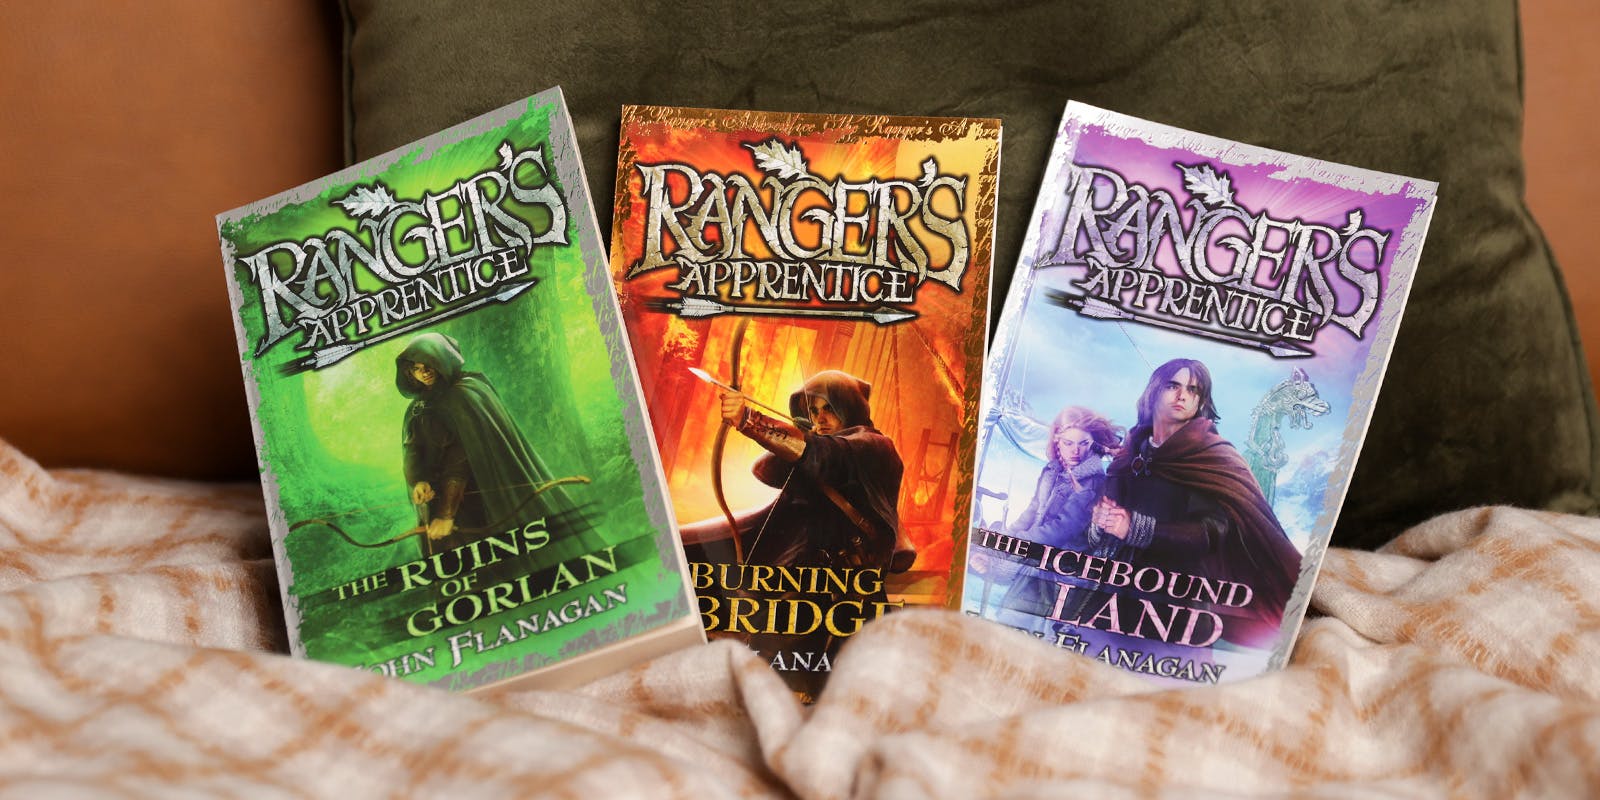 How to host a Ranger's Apprentice book club